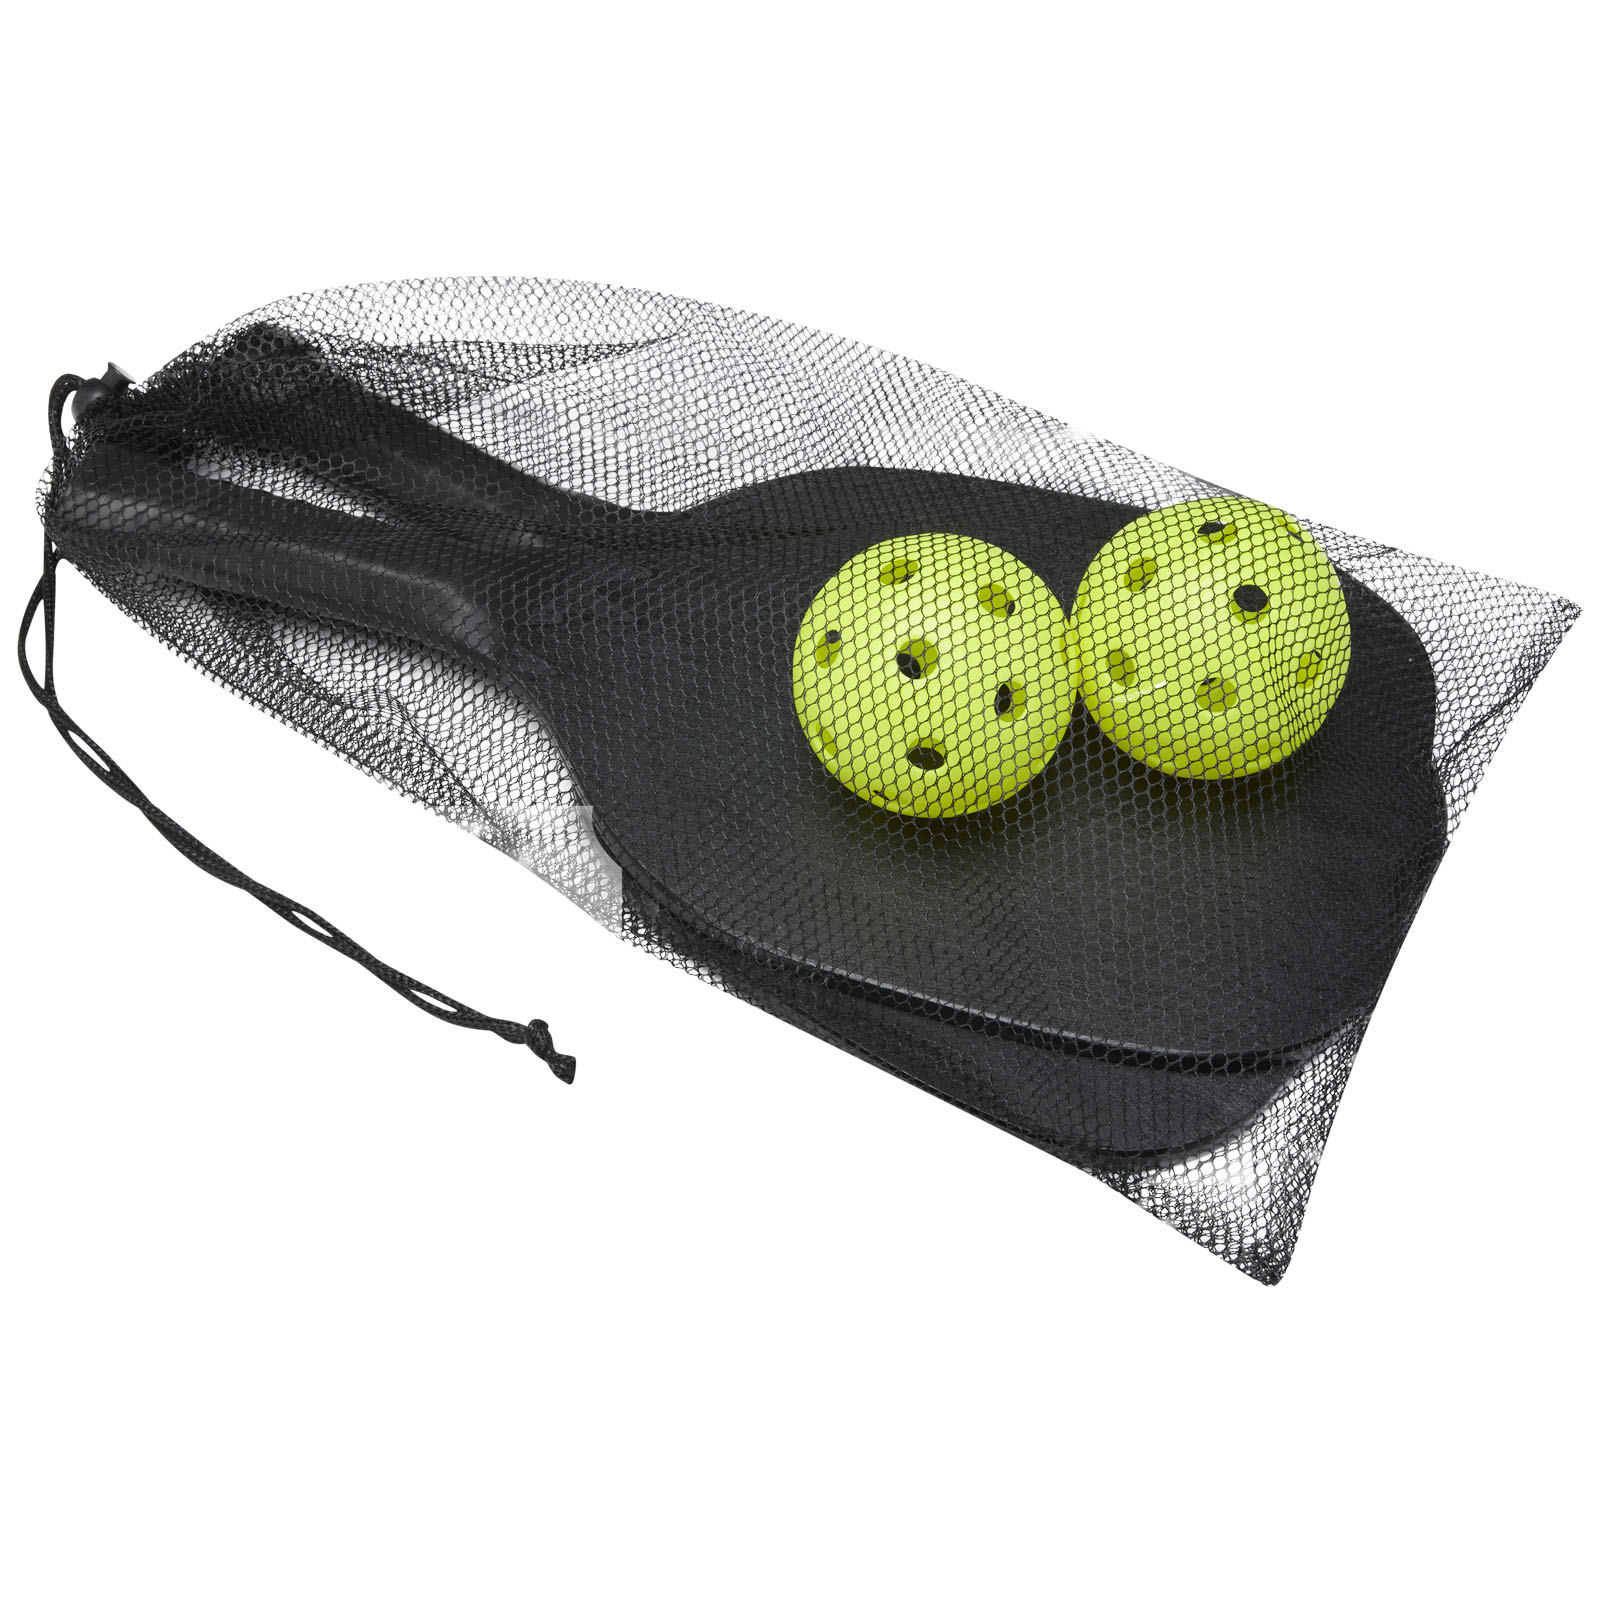 Advertising Outdoor Games - Enrique paddle set in mesh pouch - 0